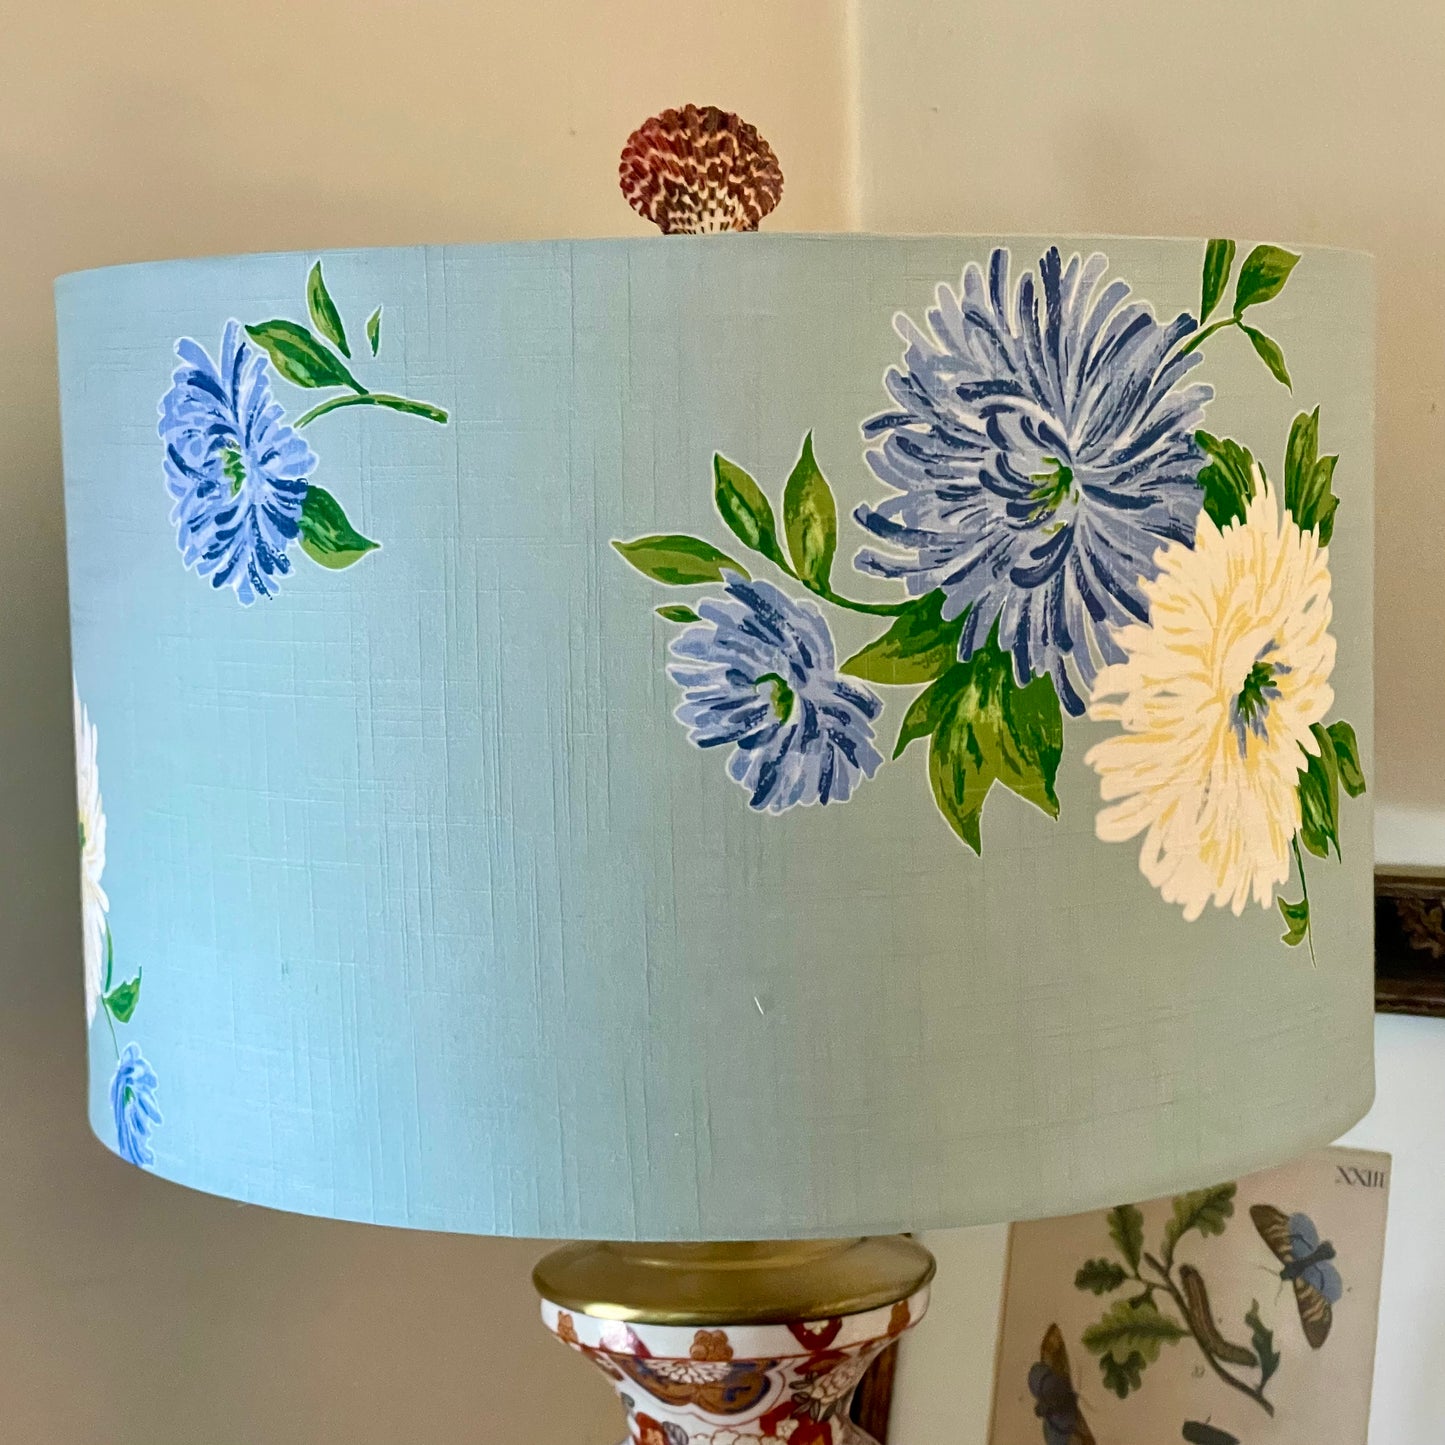 16 Inch Drum Lampshade. Vintage Summer Kimono Fabric from Japan. Cadet Blue with Painterly Blue and Cream Blossoms.